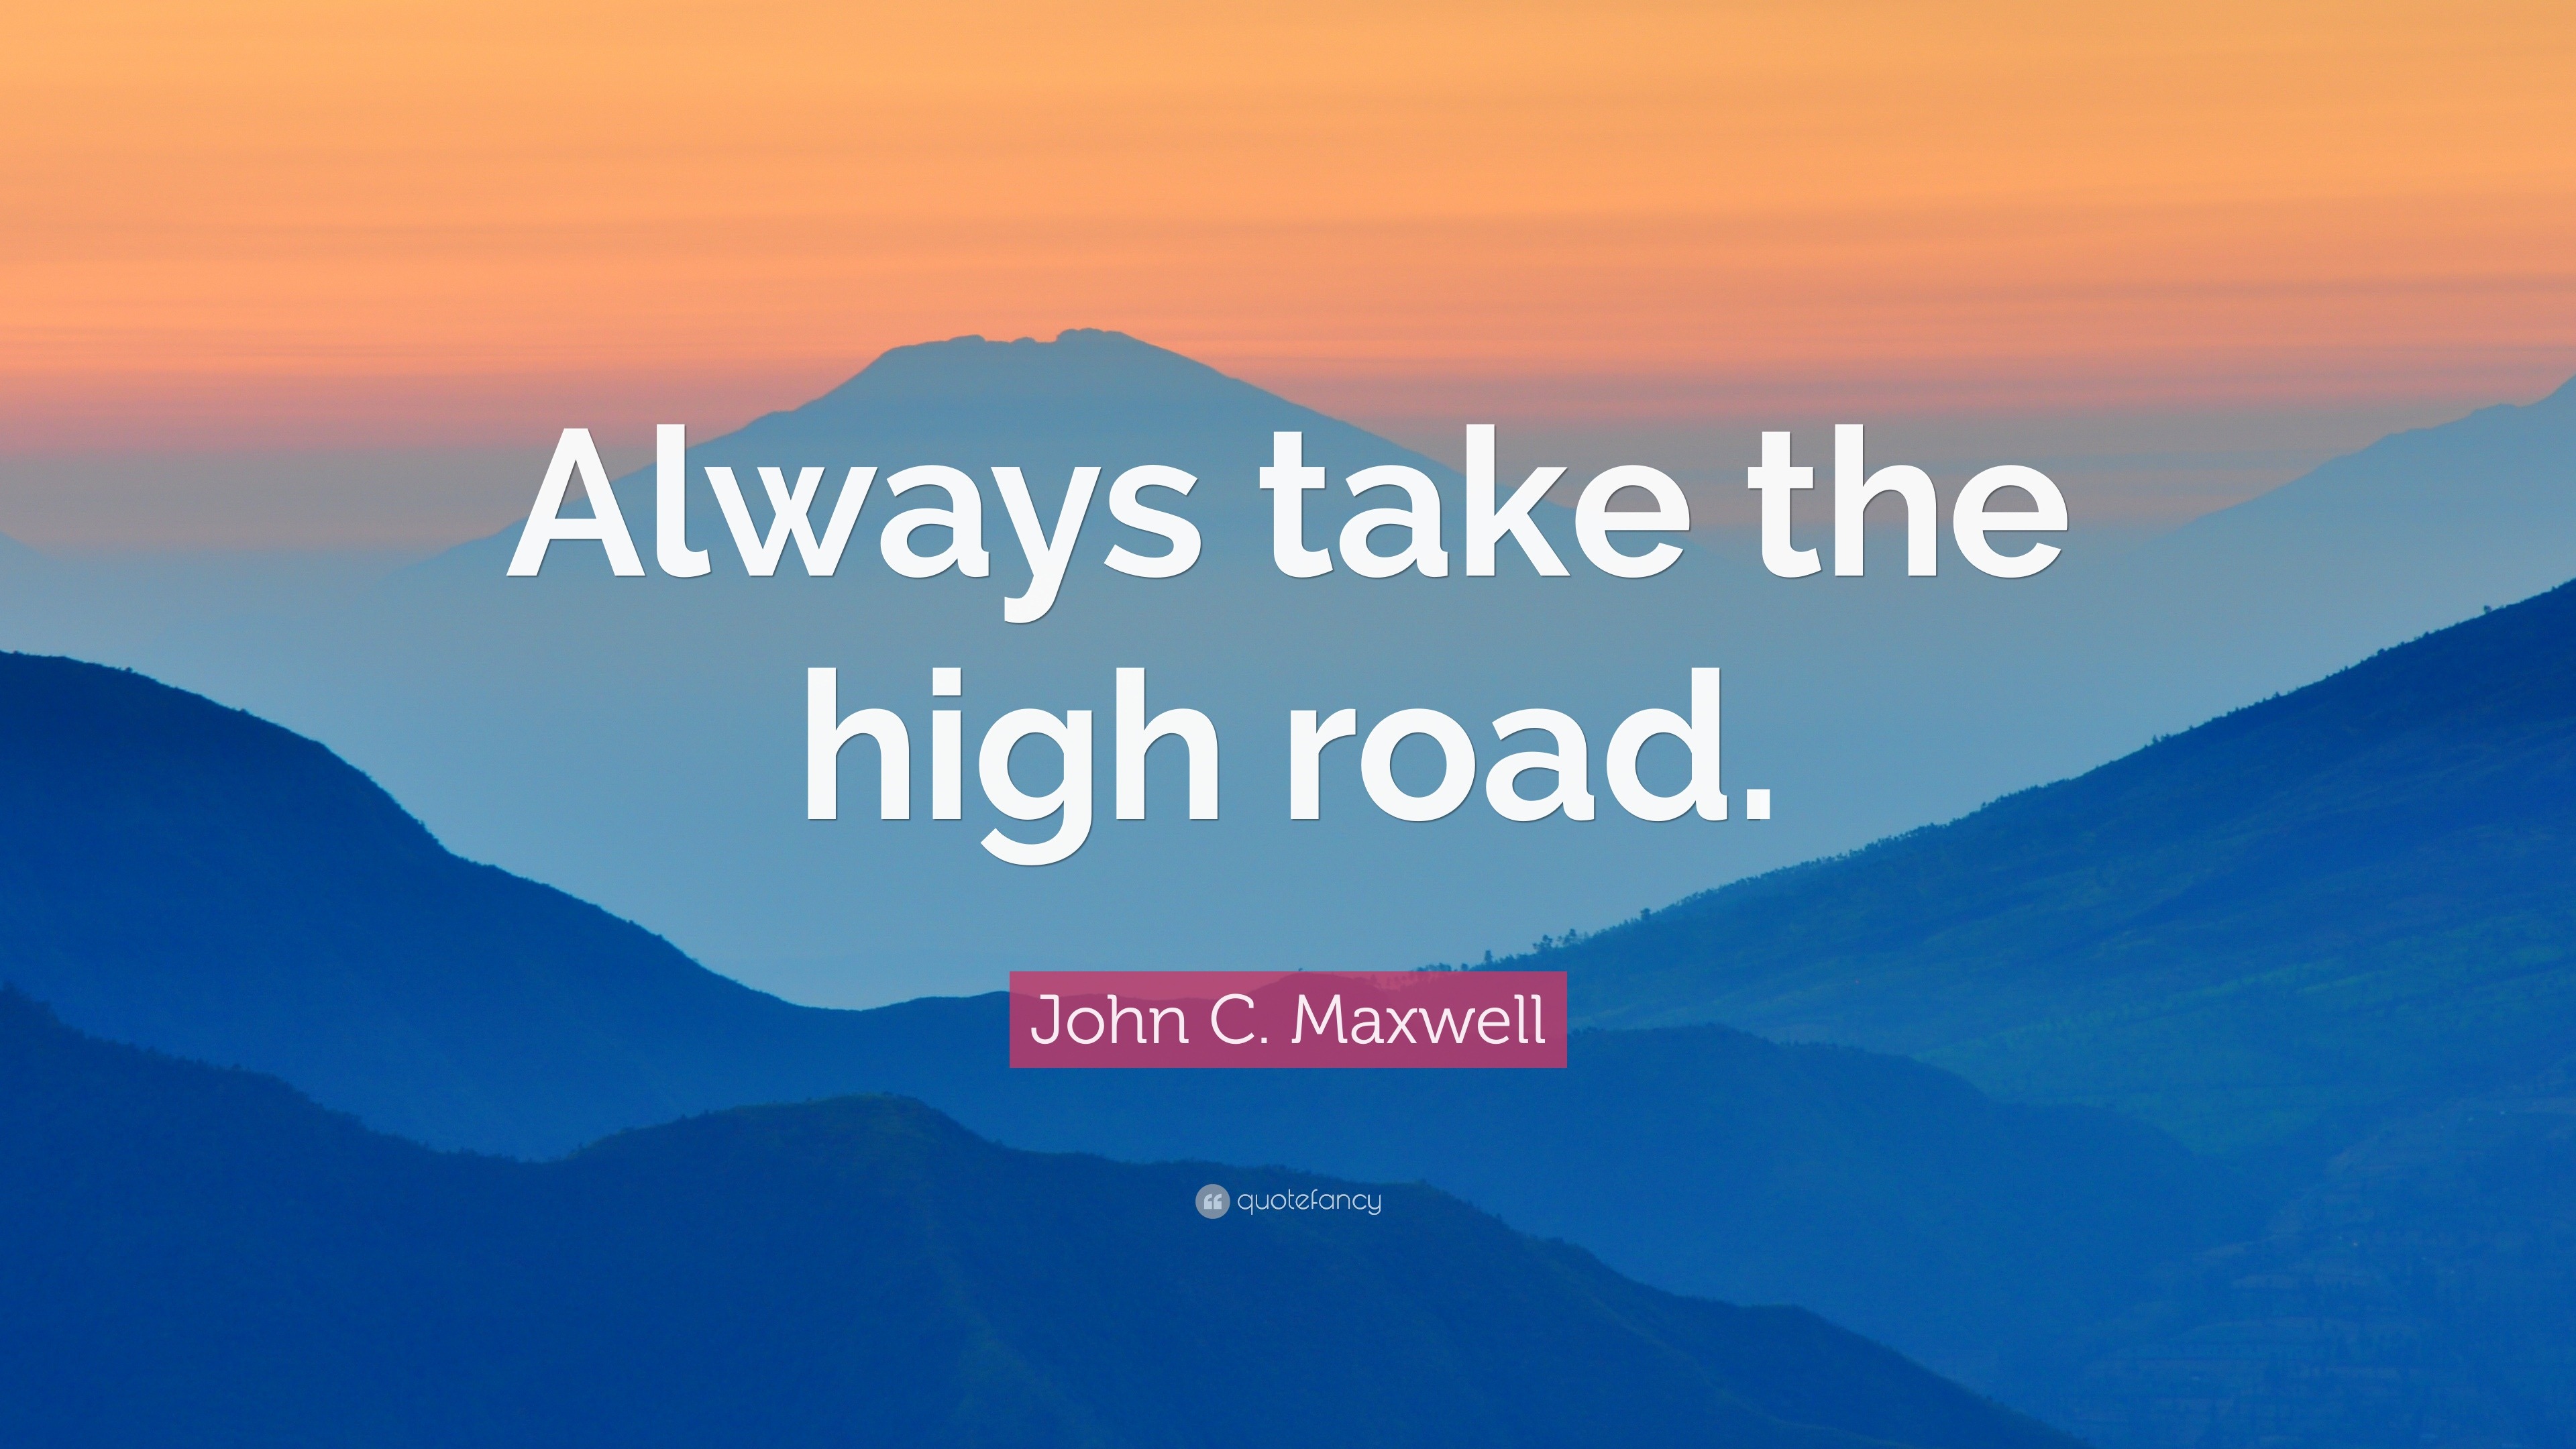 John C. Maxwell Quote “Always take the high road.” (12 wallpapers